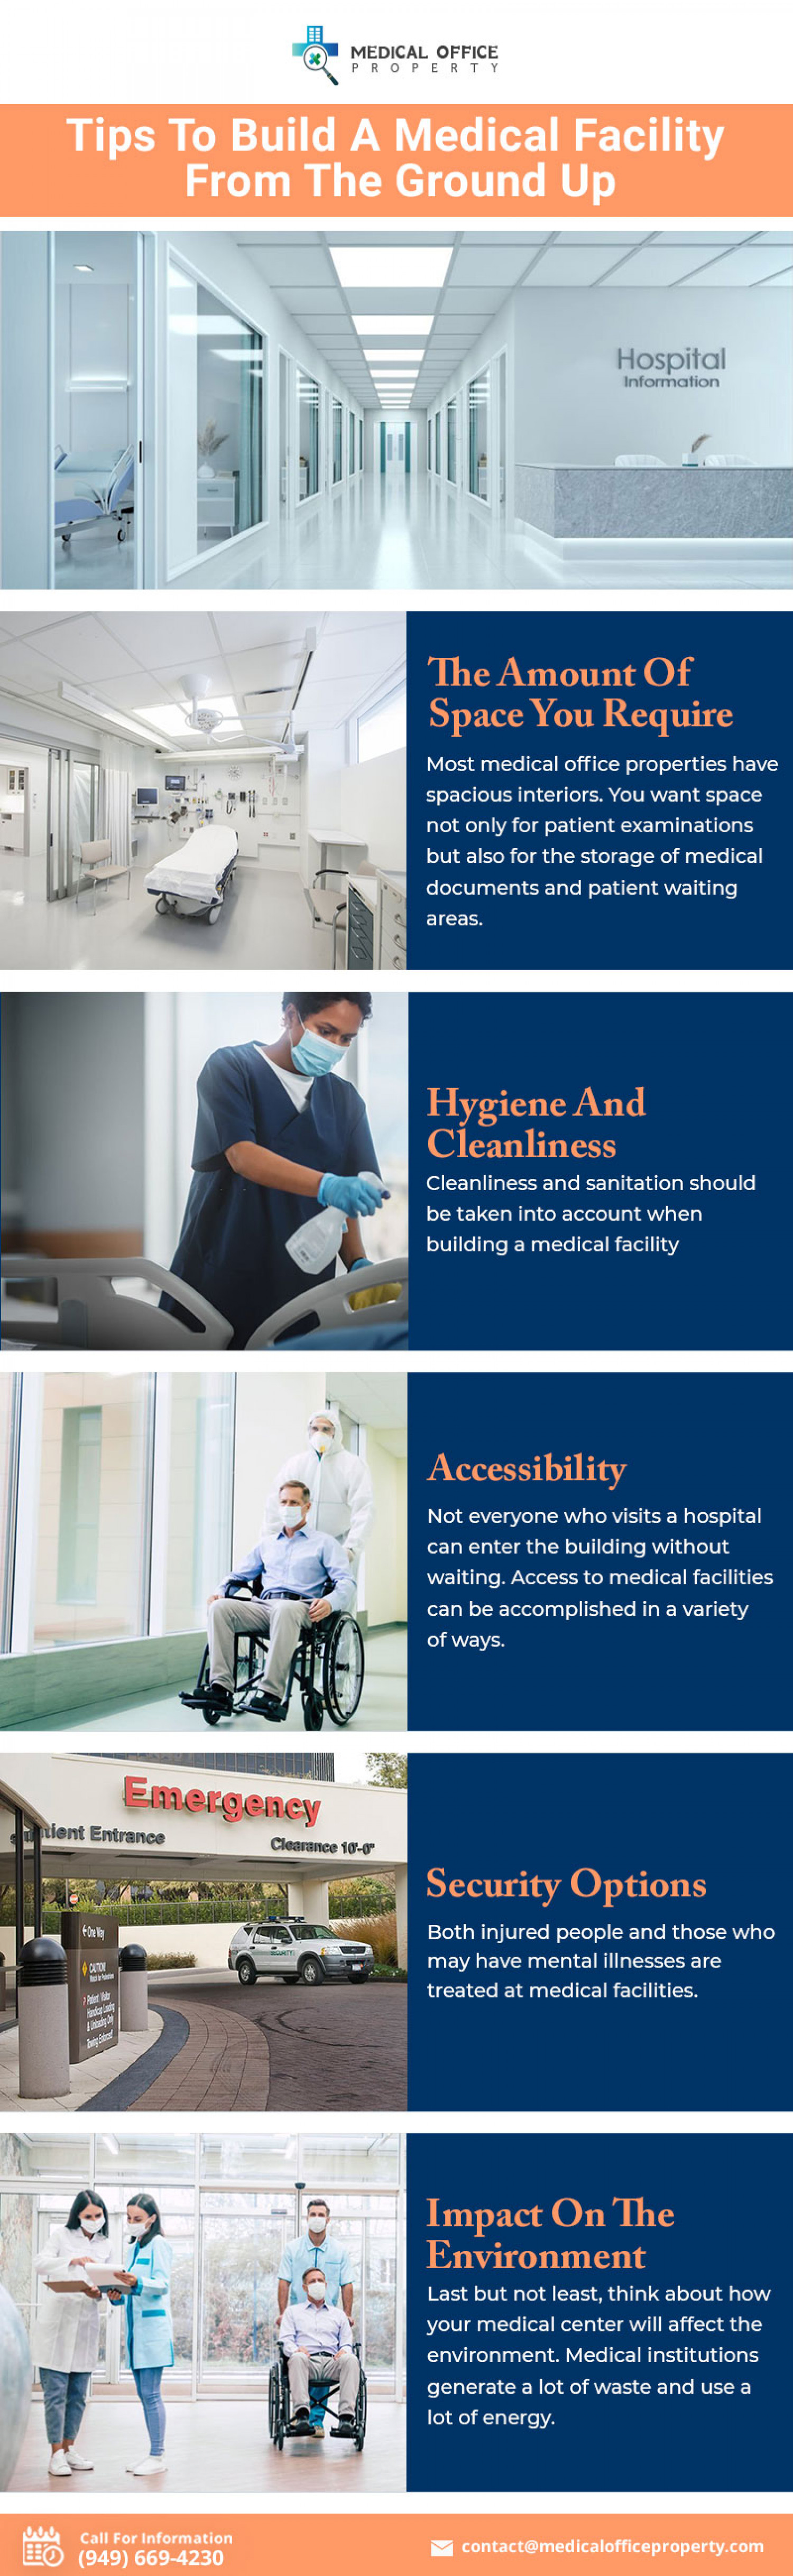 Tips To Build A Medical Facility From The Ground Up Infographic